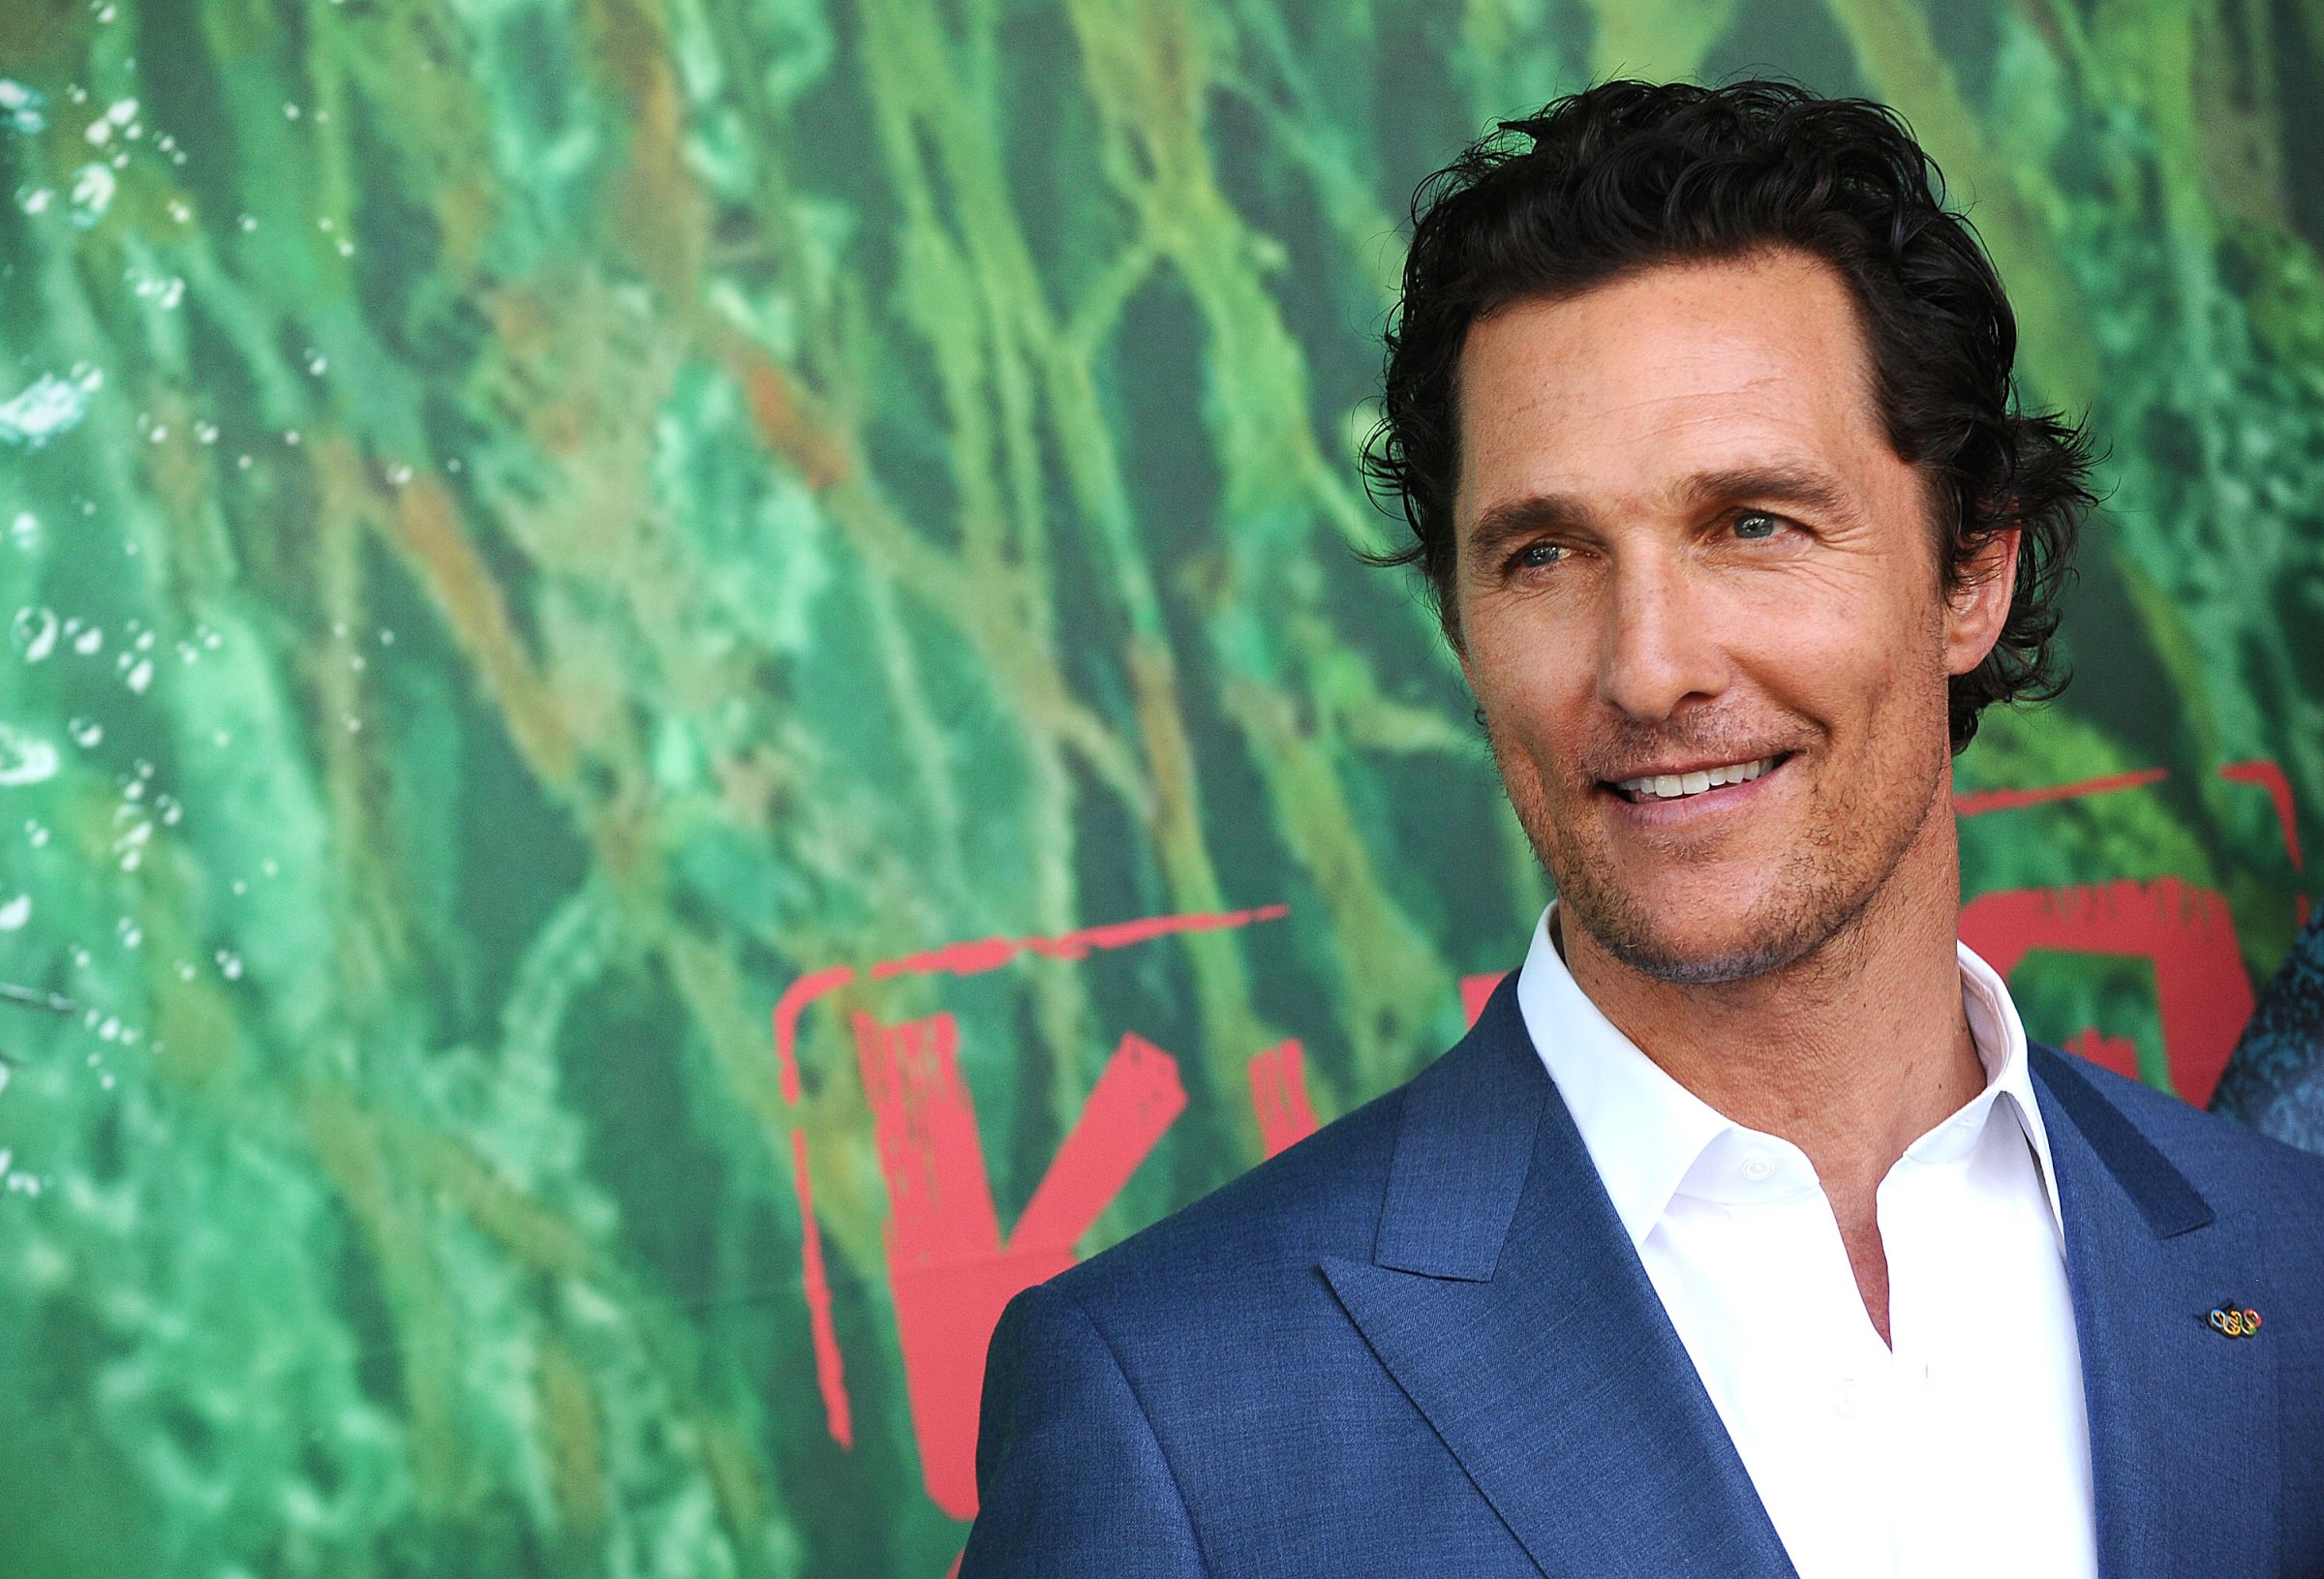 Actor Matthew McConaughey attends the premiere of "Kubo and the Two Strings" at AMC Universal City Walk on August 14, 2016 in Universal City, California.